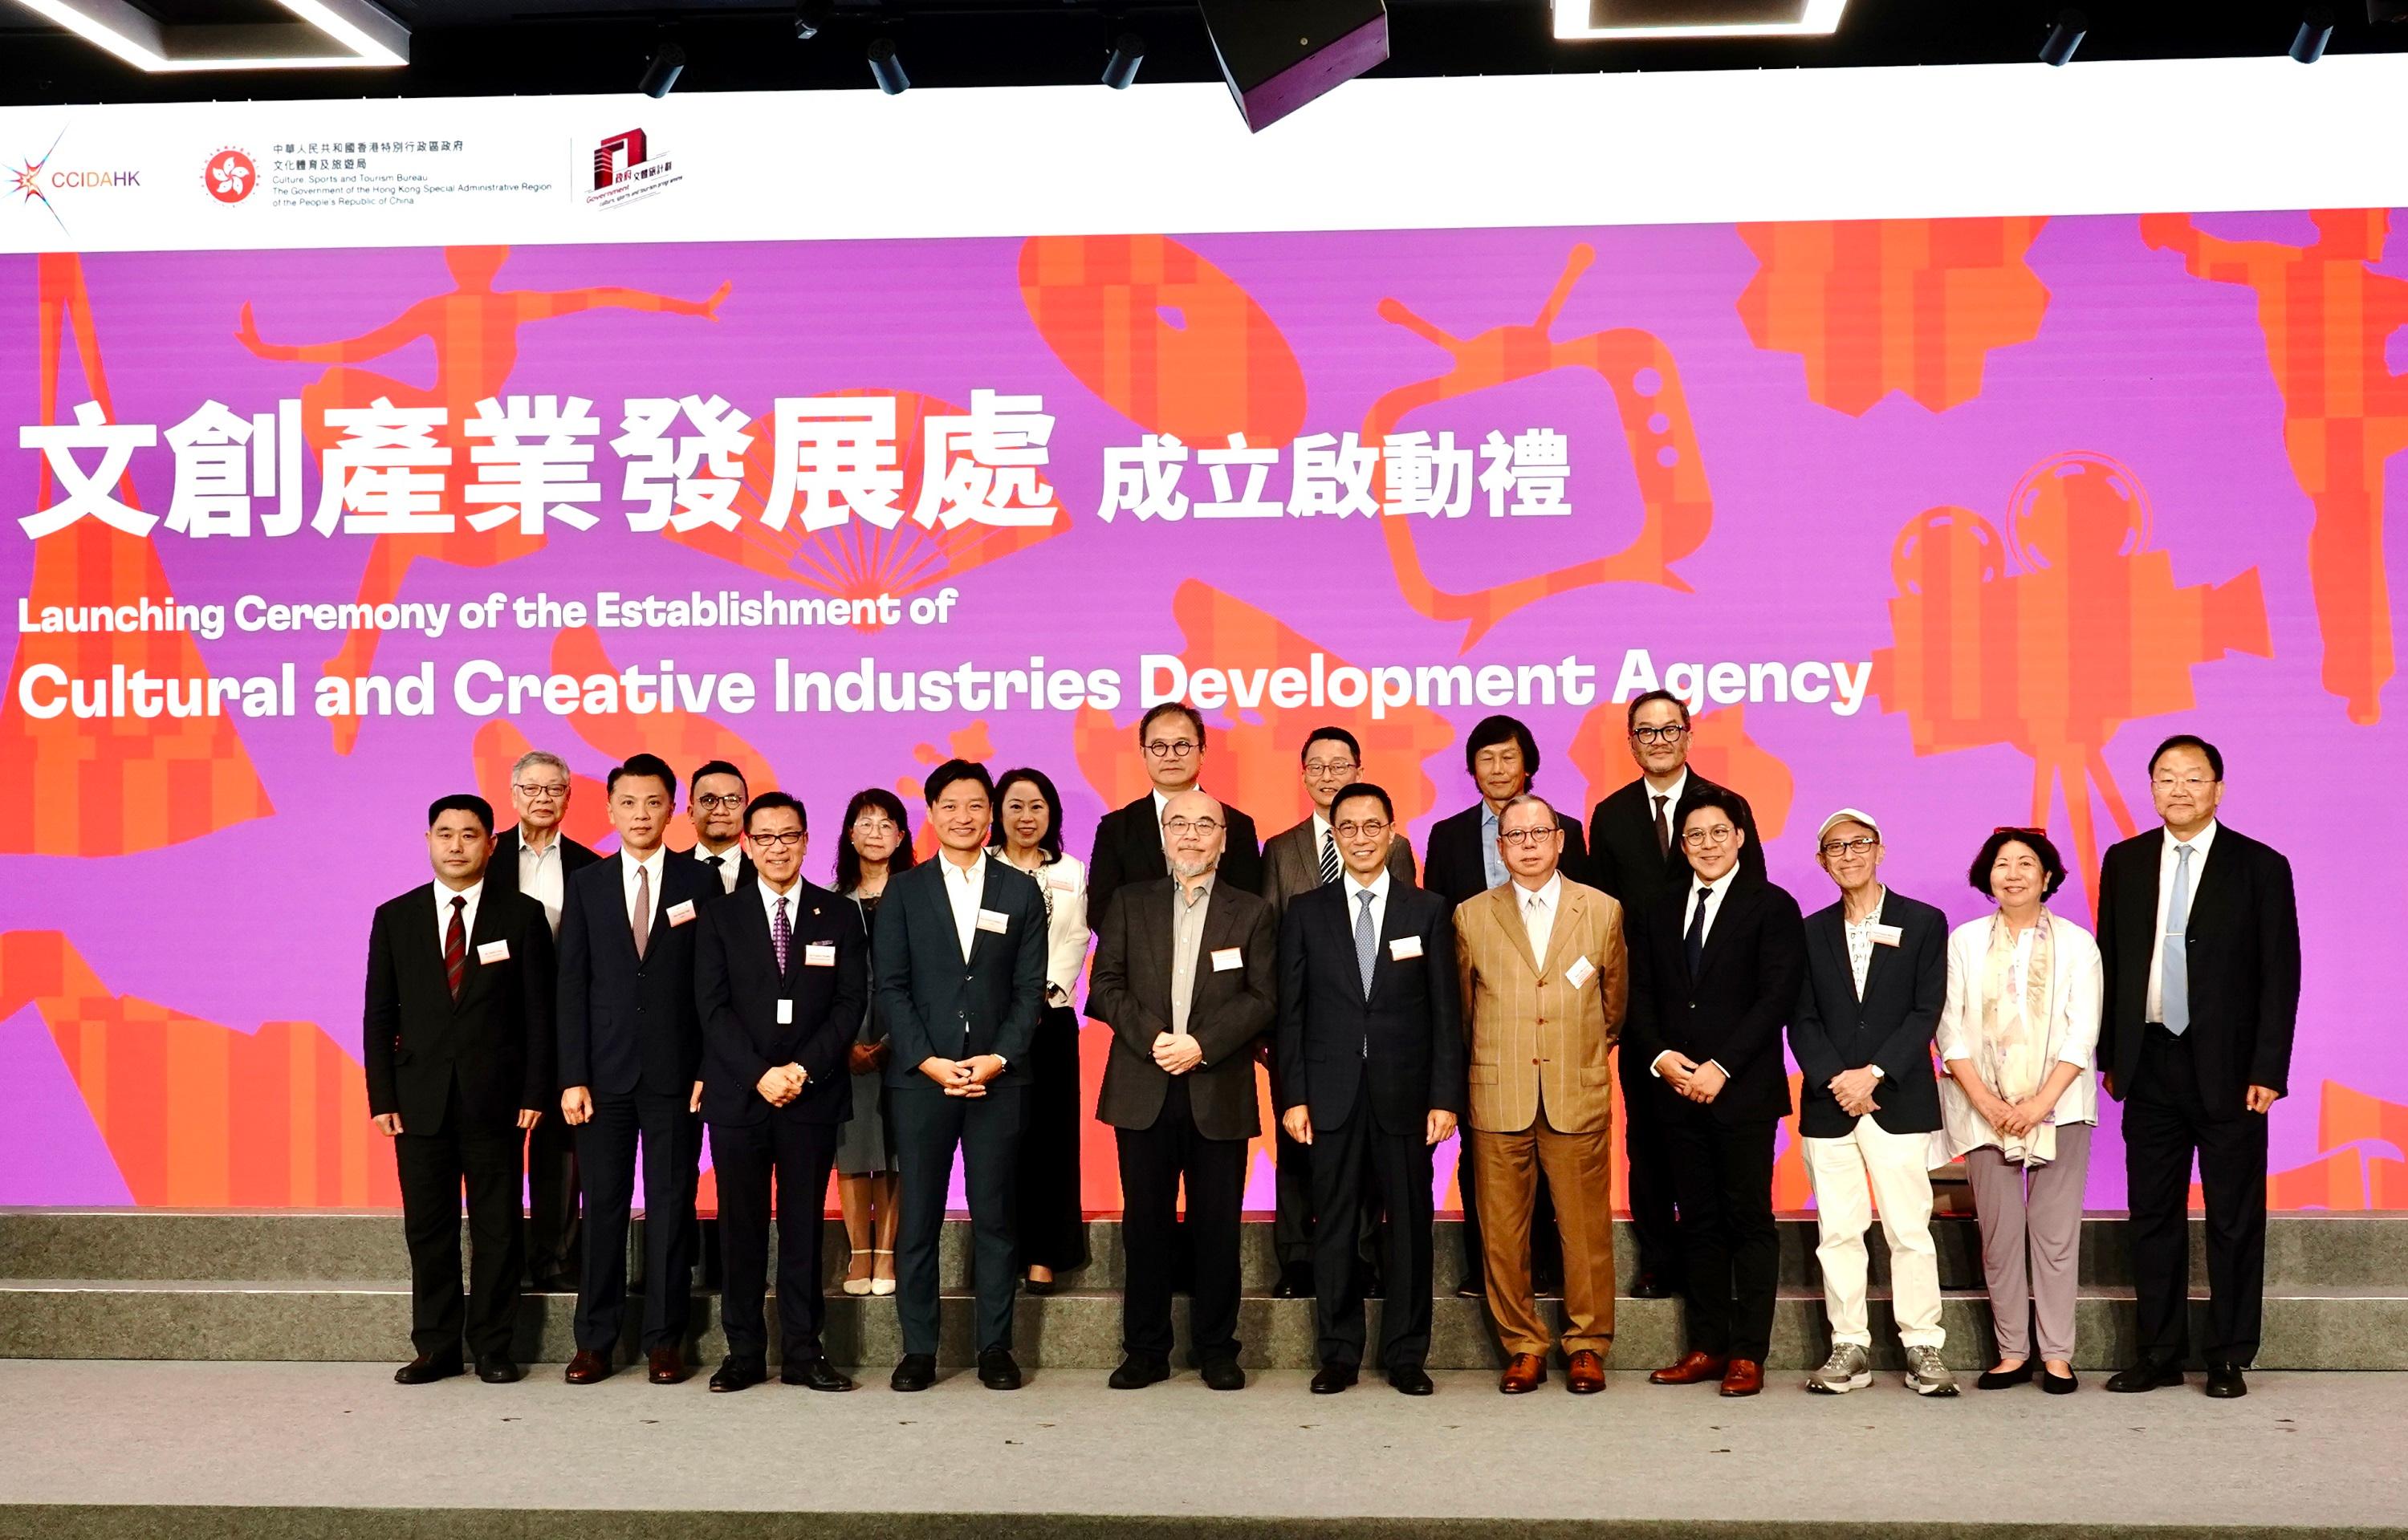 The launching ceremony for the Cultural and Creative Industries Development Agency of the Culture, Sports and Tourism Bureau was held today (June 24). Photo shows the Secretary for Culture, Sports and Tourism, Mr Kevin Yeung (front row, centre); the Permanent Secretary for Culture, Sports and Tourism, Mr Joe Wong (back row, fourth right); the Director of Leisure and Cultural Services, Mr Vincent Liu (back row, third right), and members of the Legislative Council and the Culture Commission.